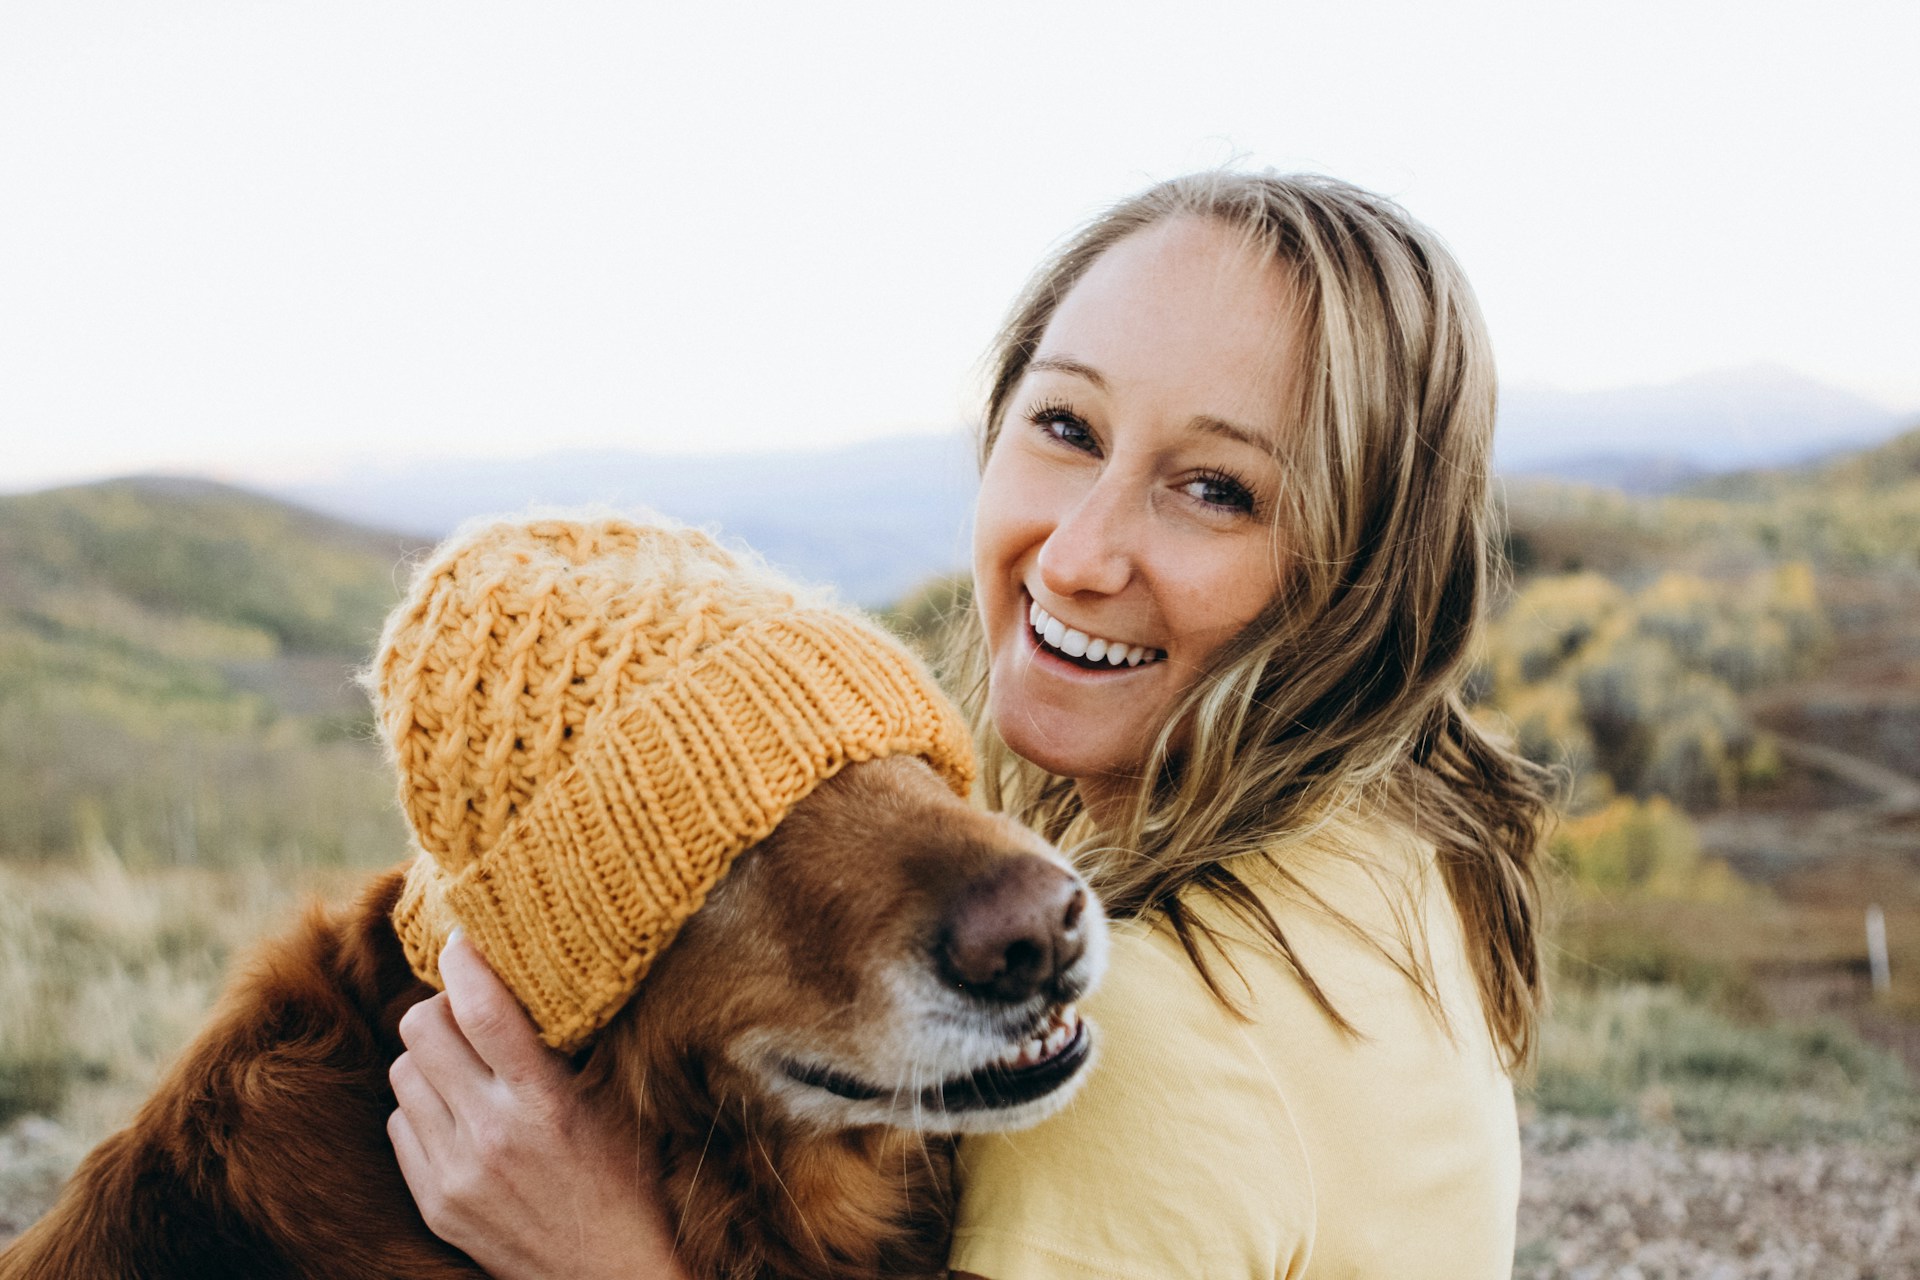 A woman puts a yellow knit hat on a dog and smiles at the camera